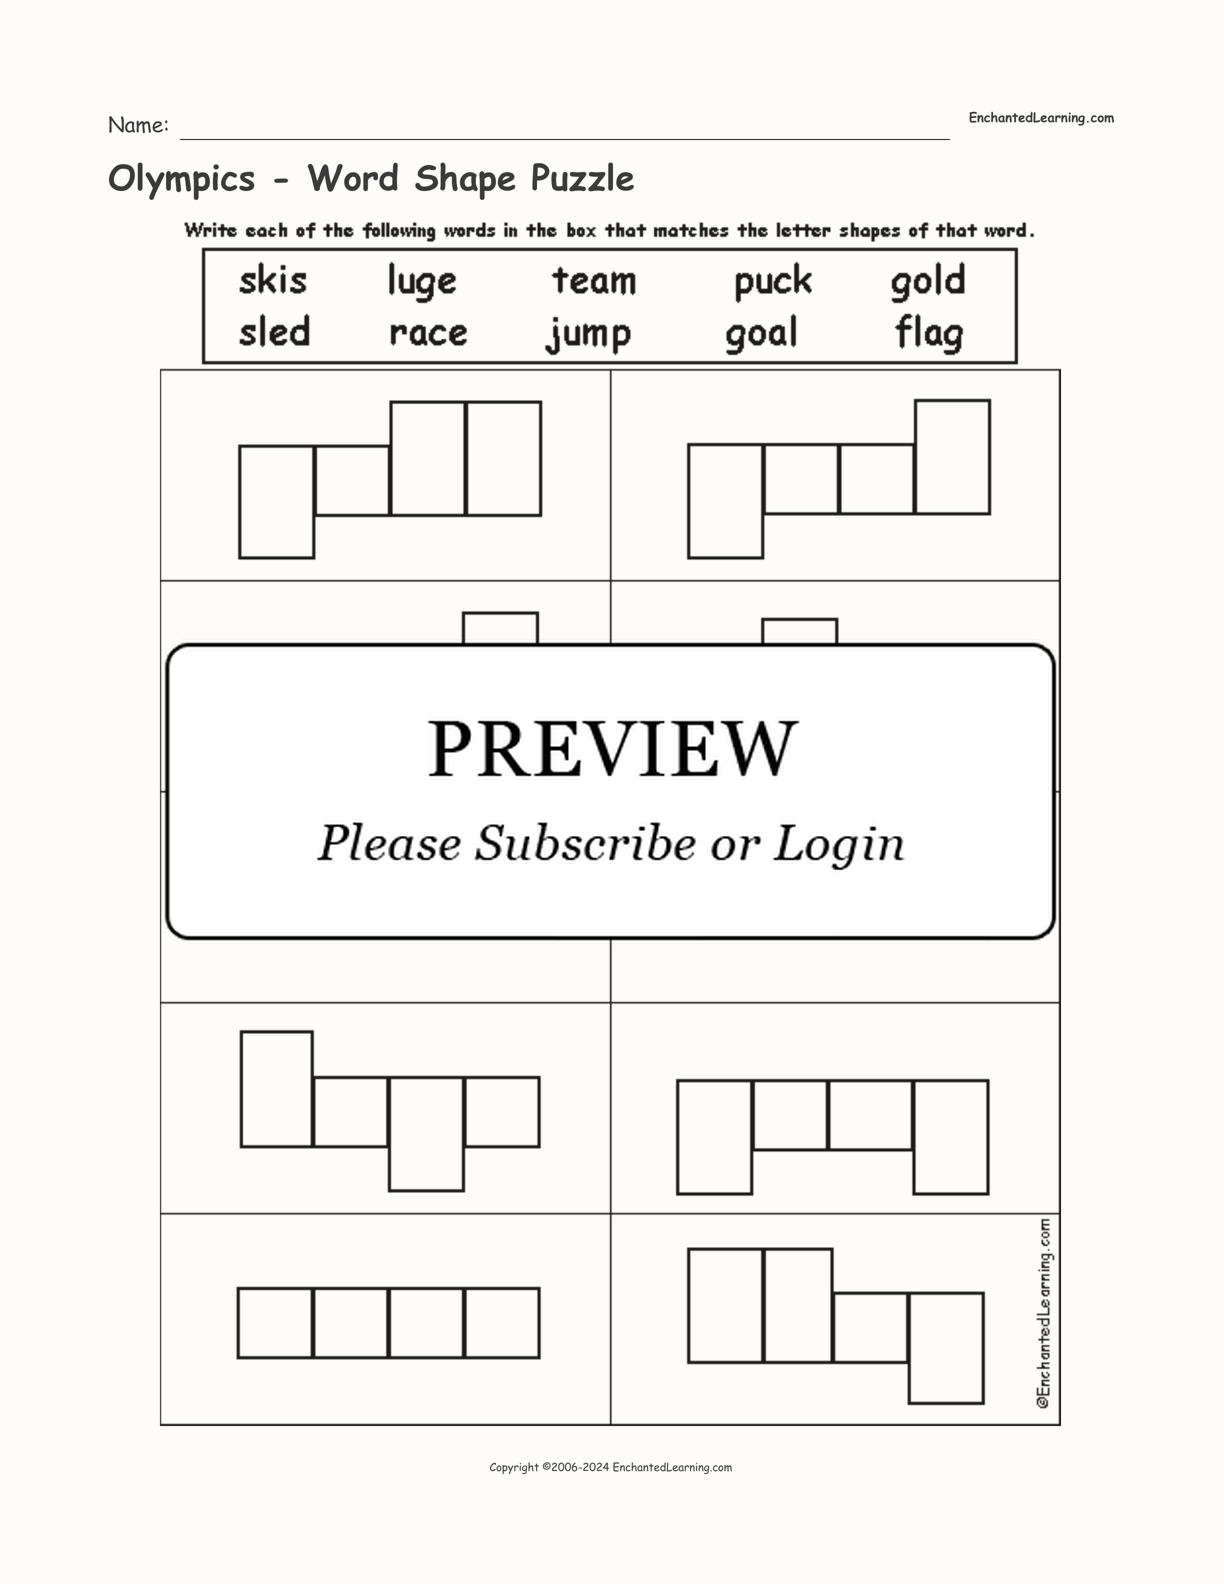 Olympics - Word Shape Puzzle interactive worksheet page 1